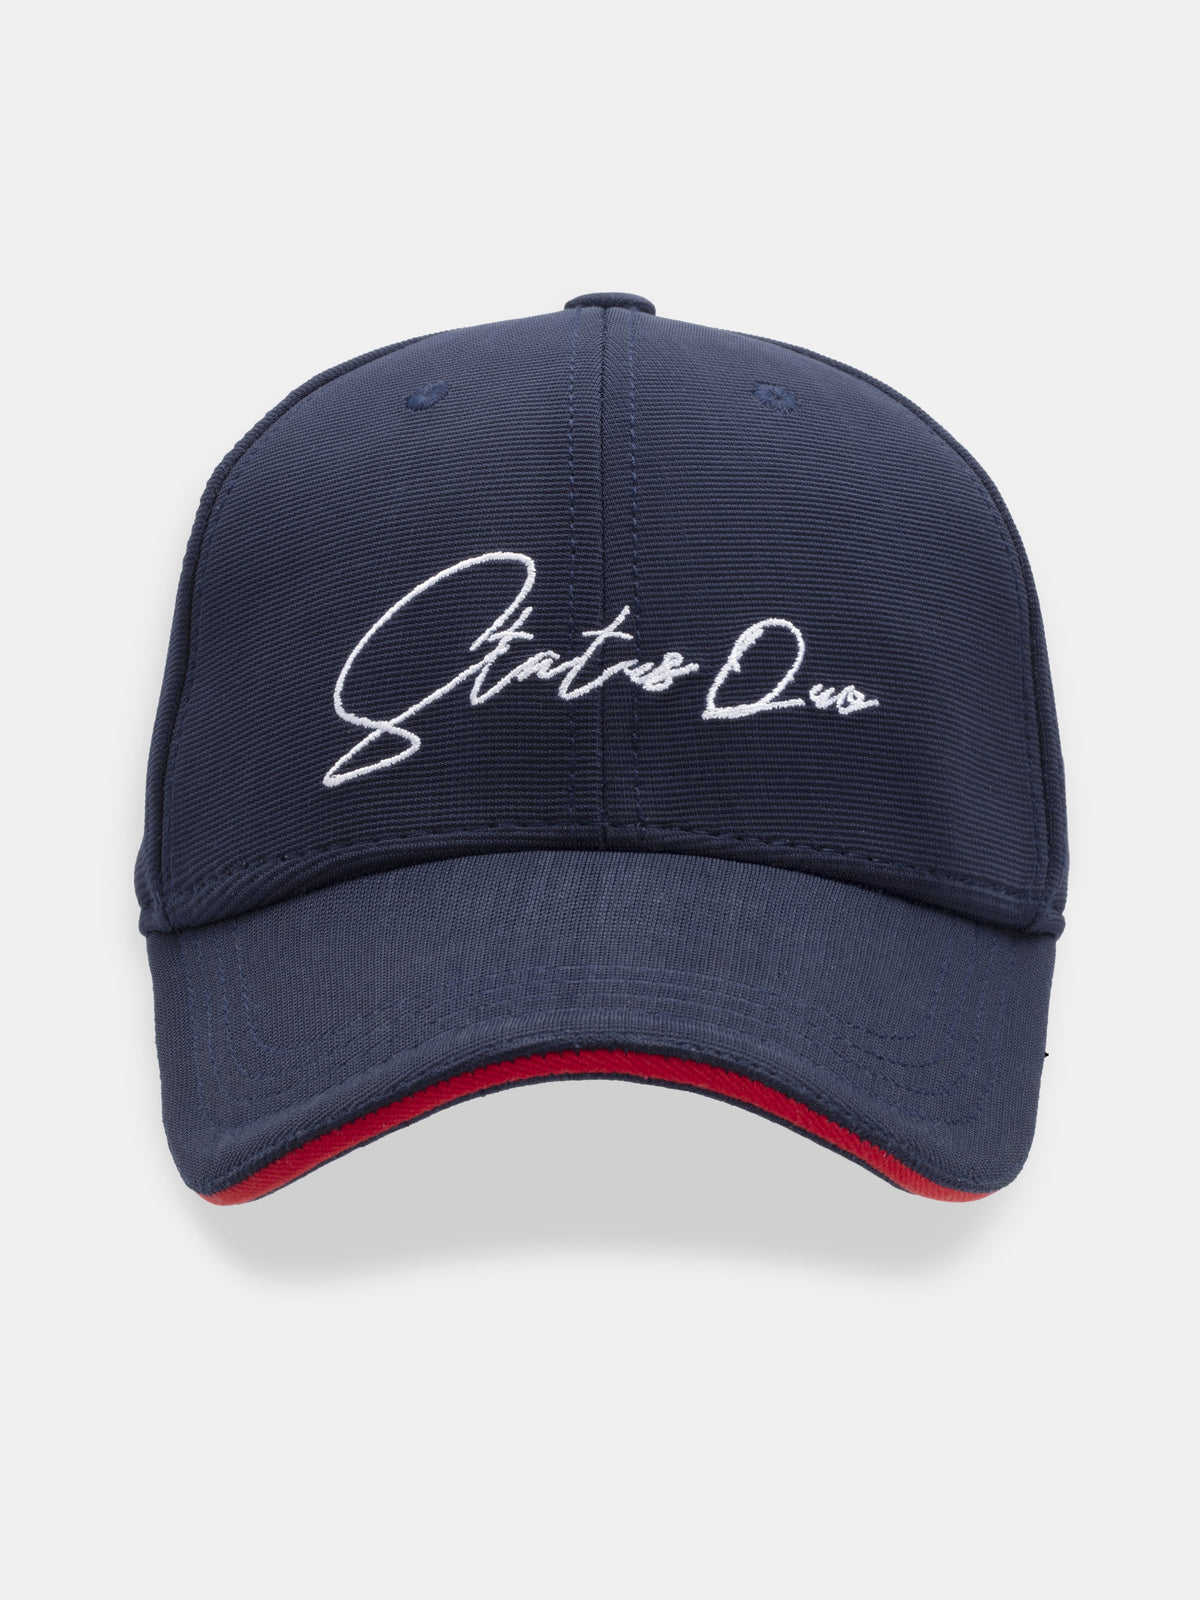 Navy Embroidered Cap